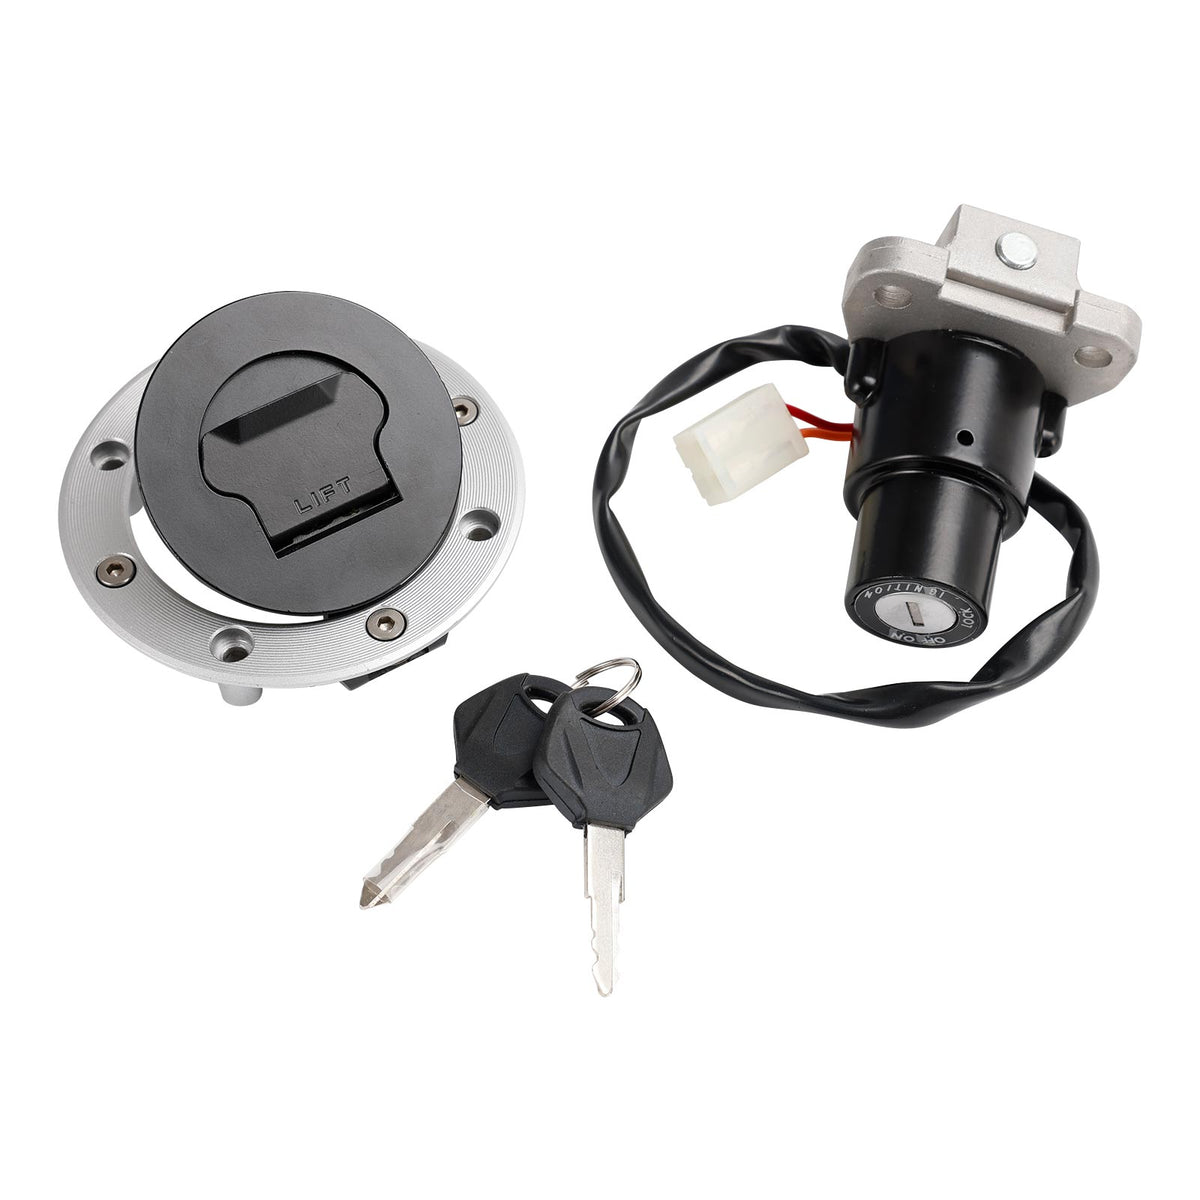 Ignition Key Switch & Fuel Tank Cap For Hyosung GT650R GT650S GT250R GD250R